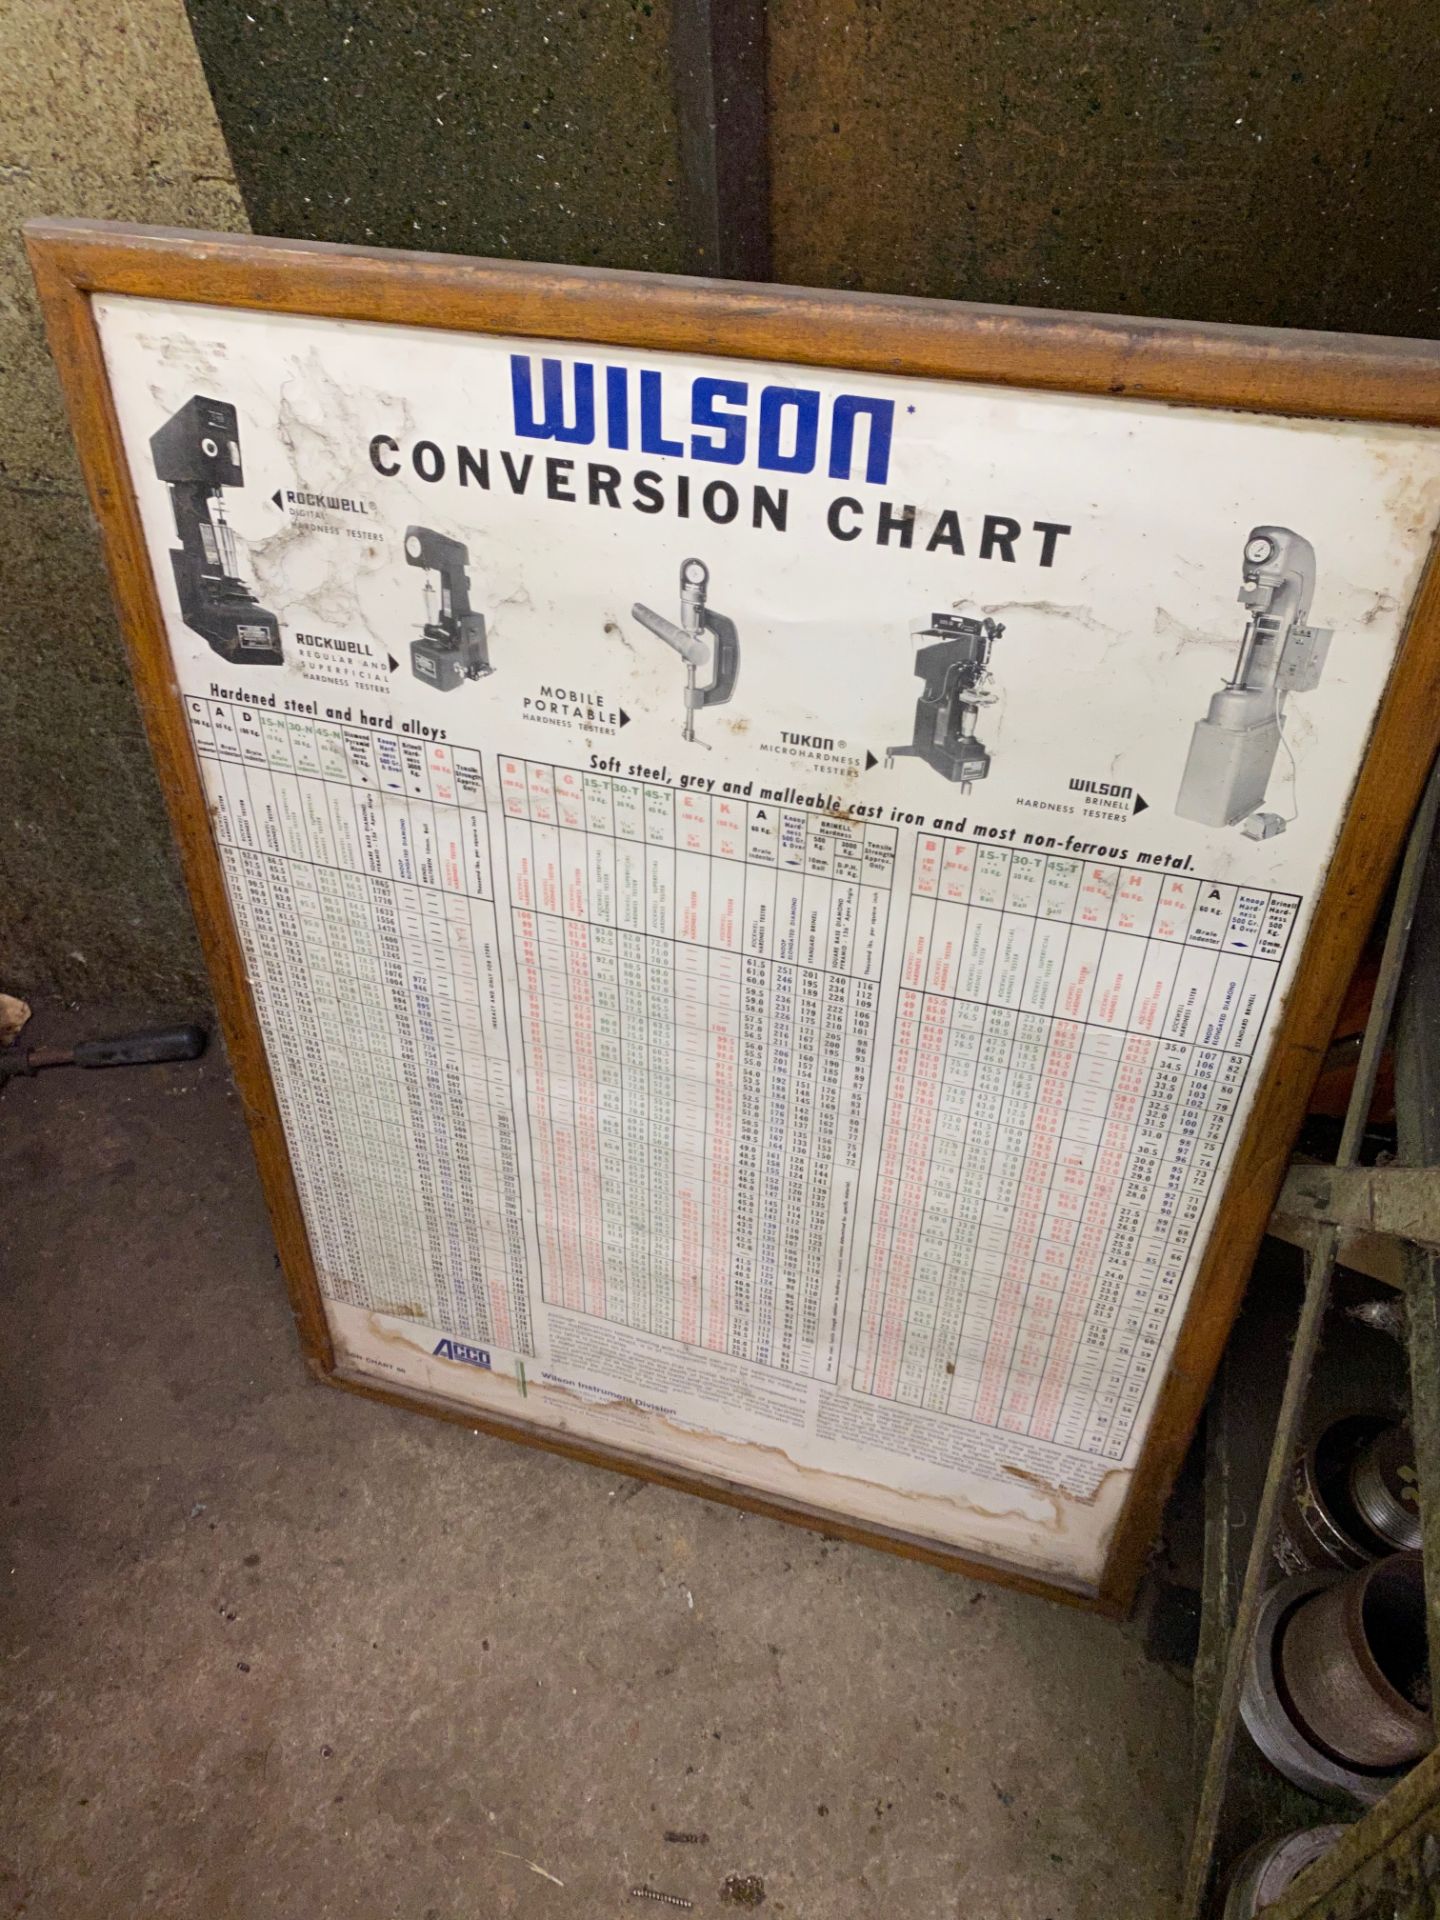 Wilson Hardness Conversion Chart and Metal Stand - Image 2 of 2